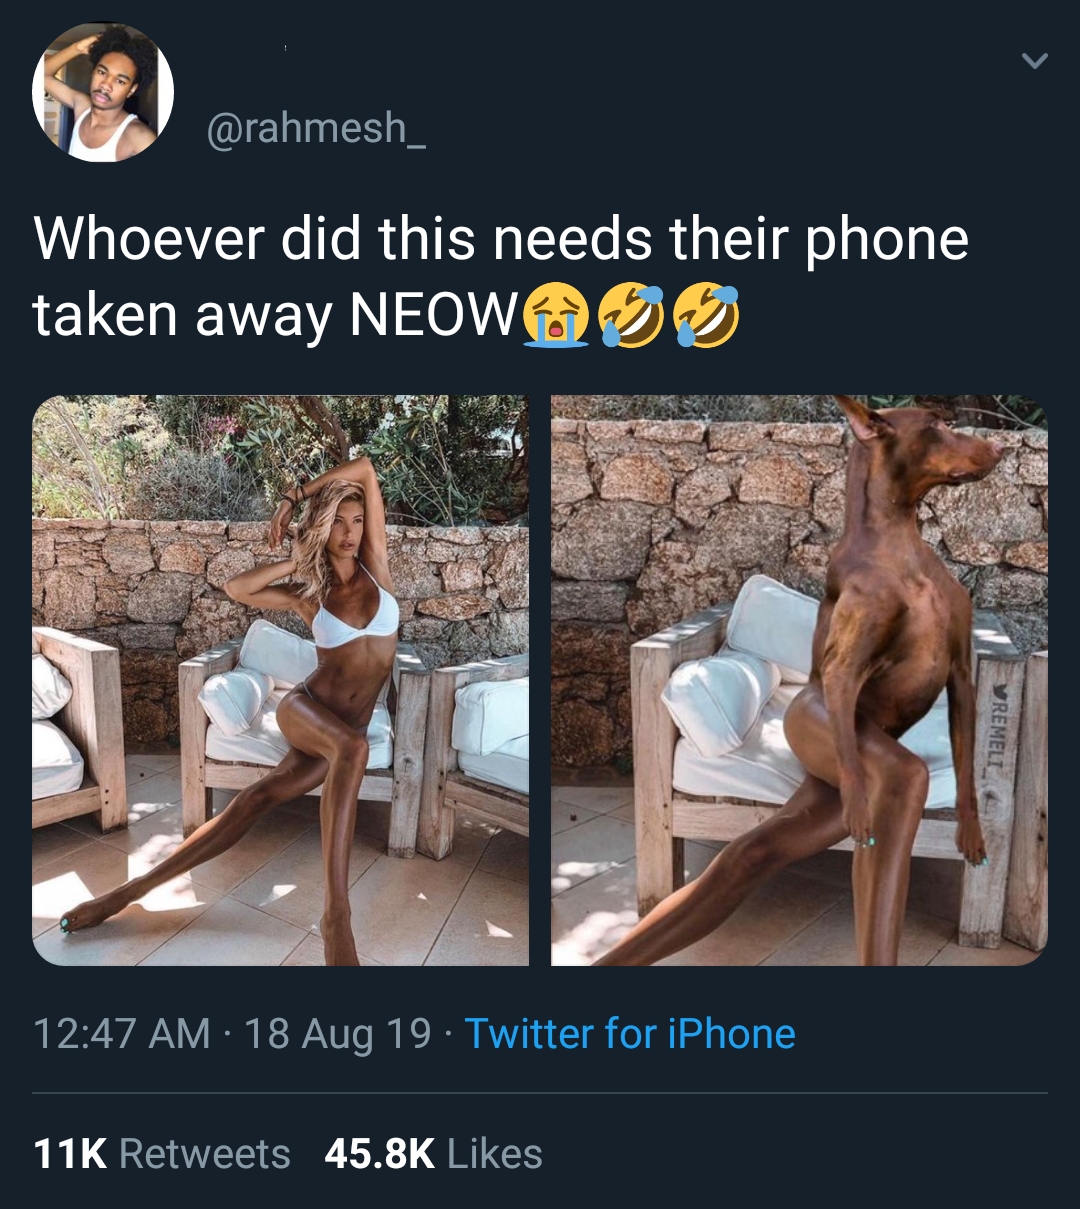 sitting - Whoever did this needs their phone taken away Neowodo 18 Aug 19. Twitter for iPhone 11K